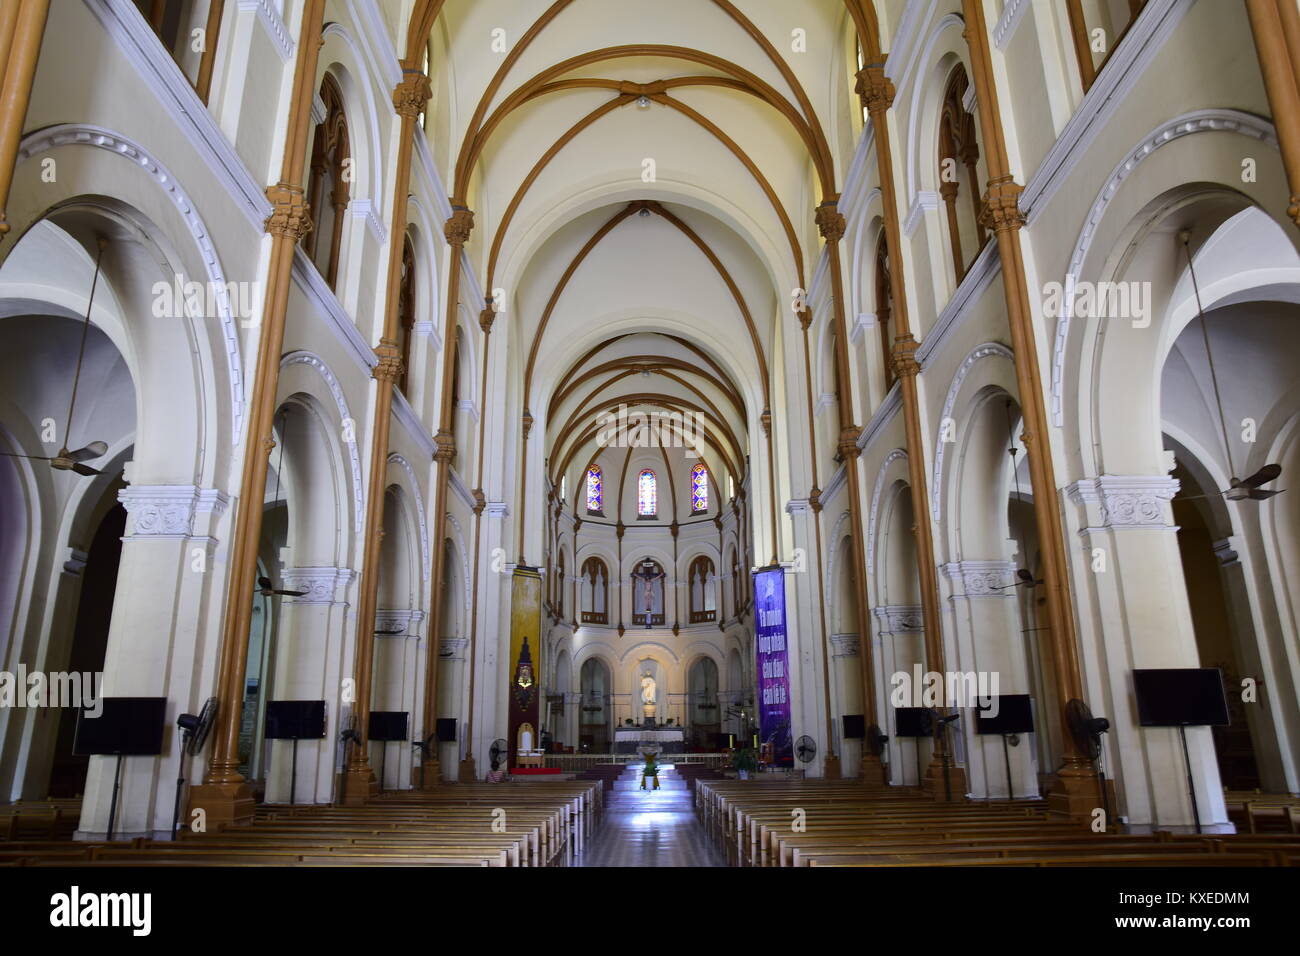 Inside a cathedral in Nha Trang, Vietnam Stock Photo